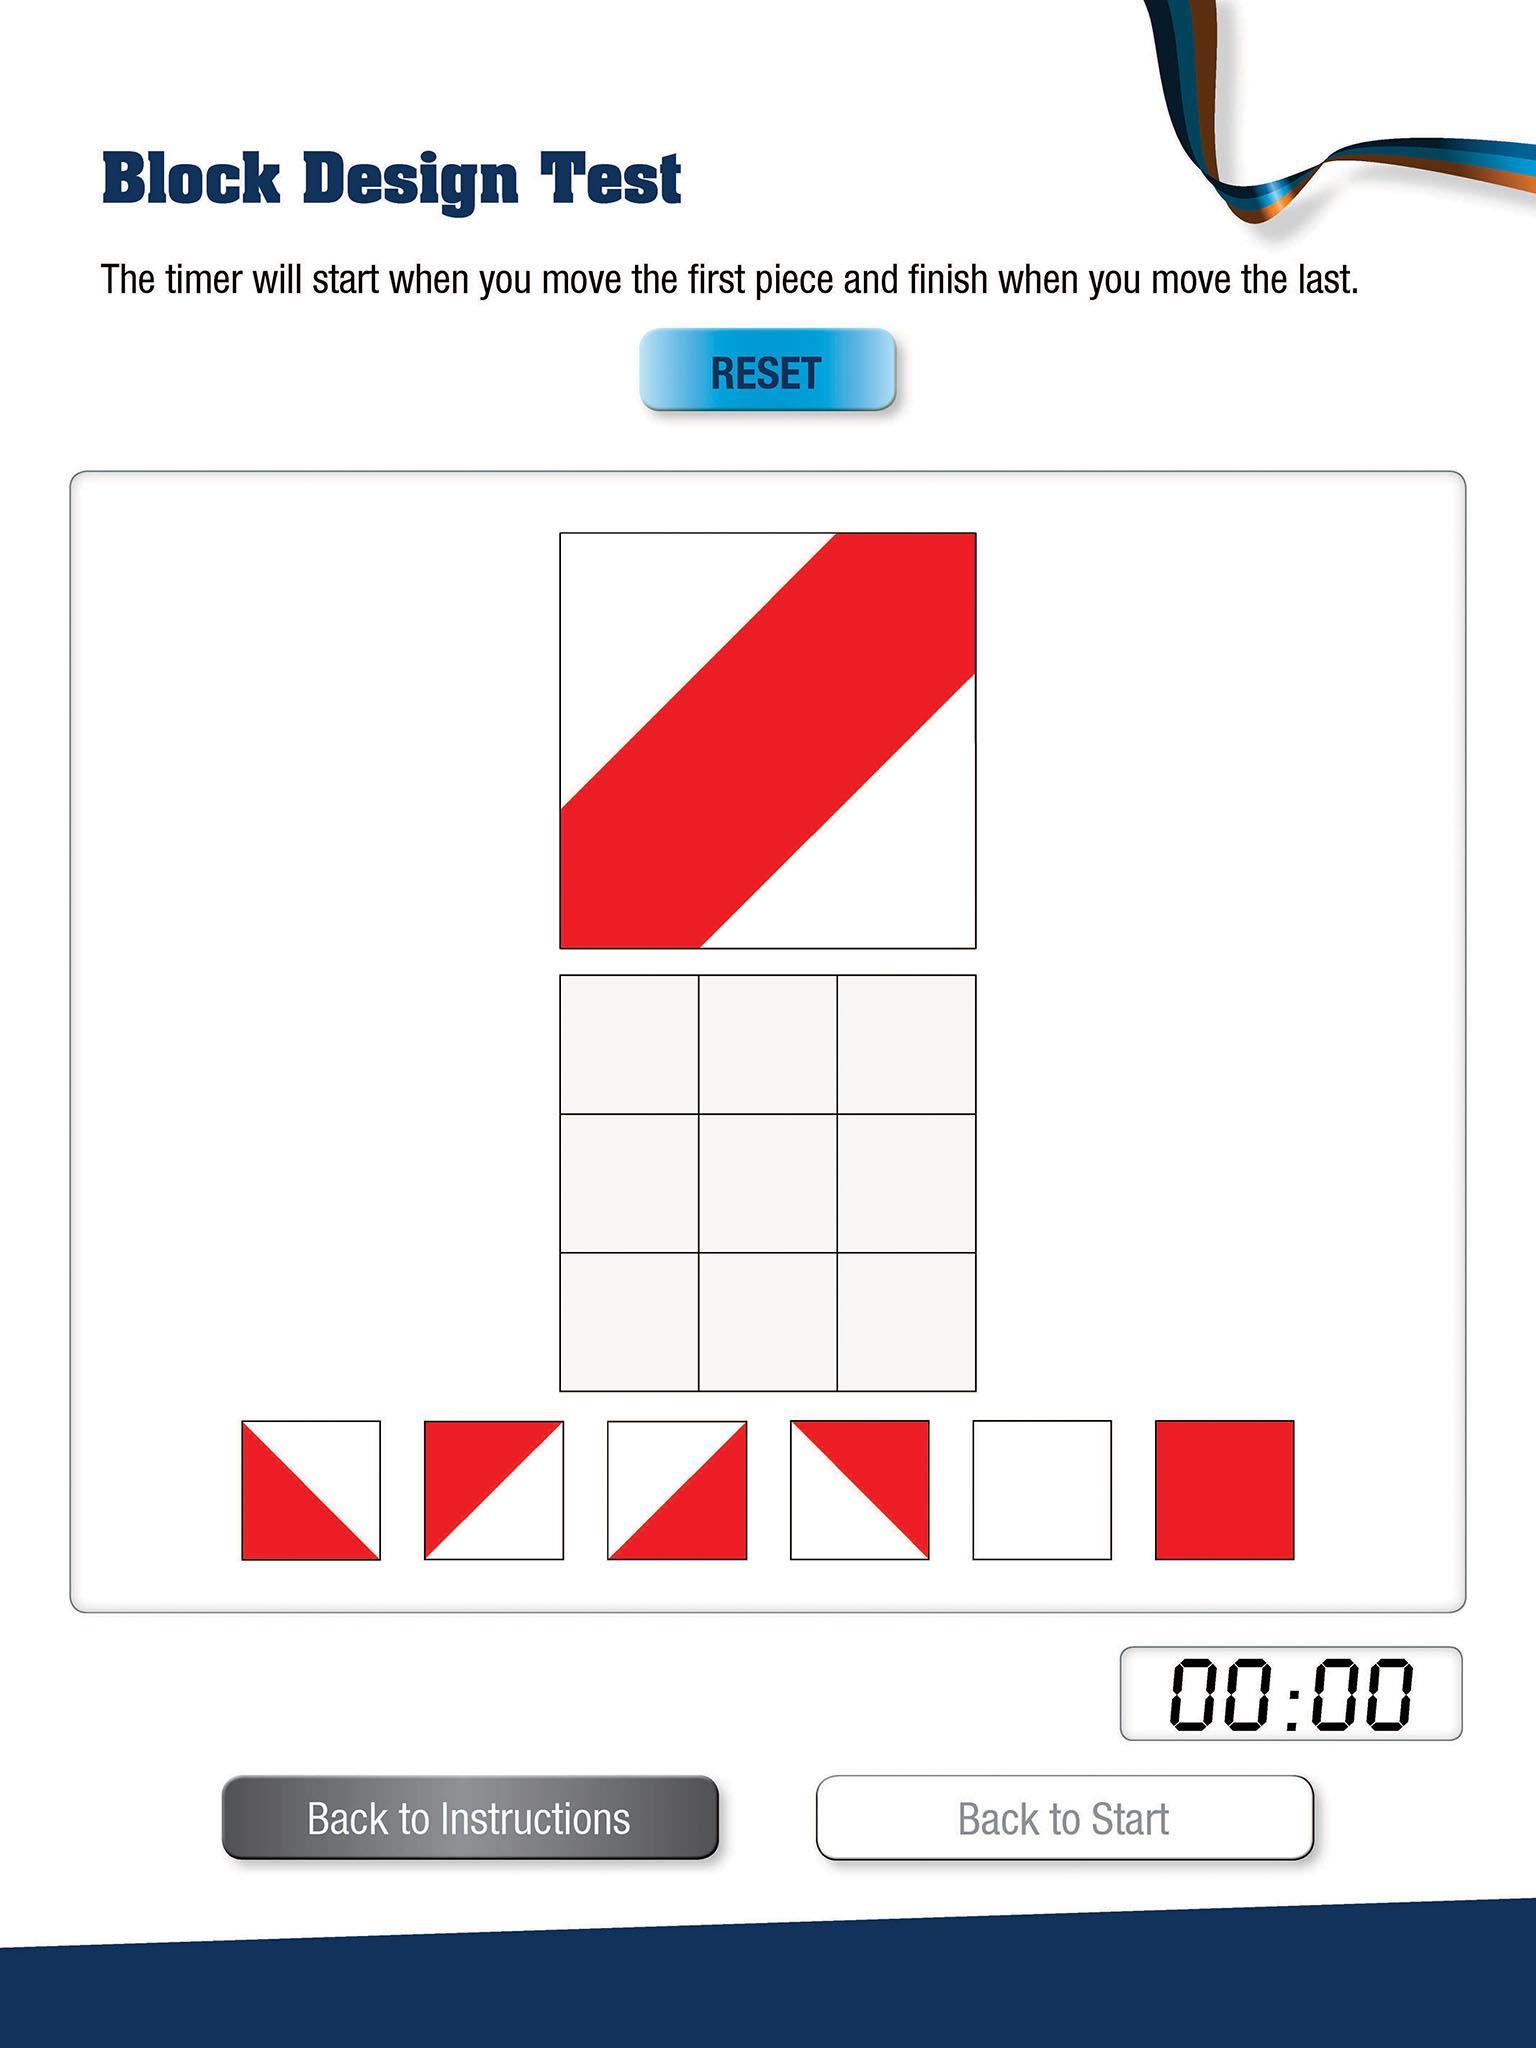 Block Design Test for Android - APK Download